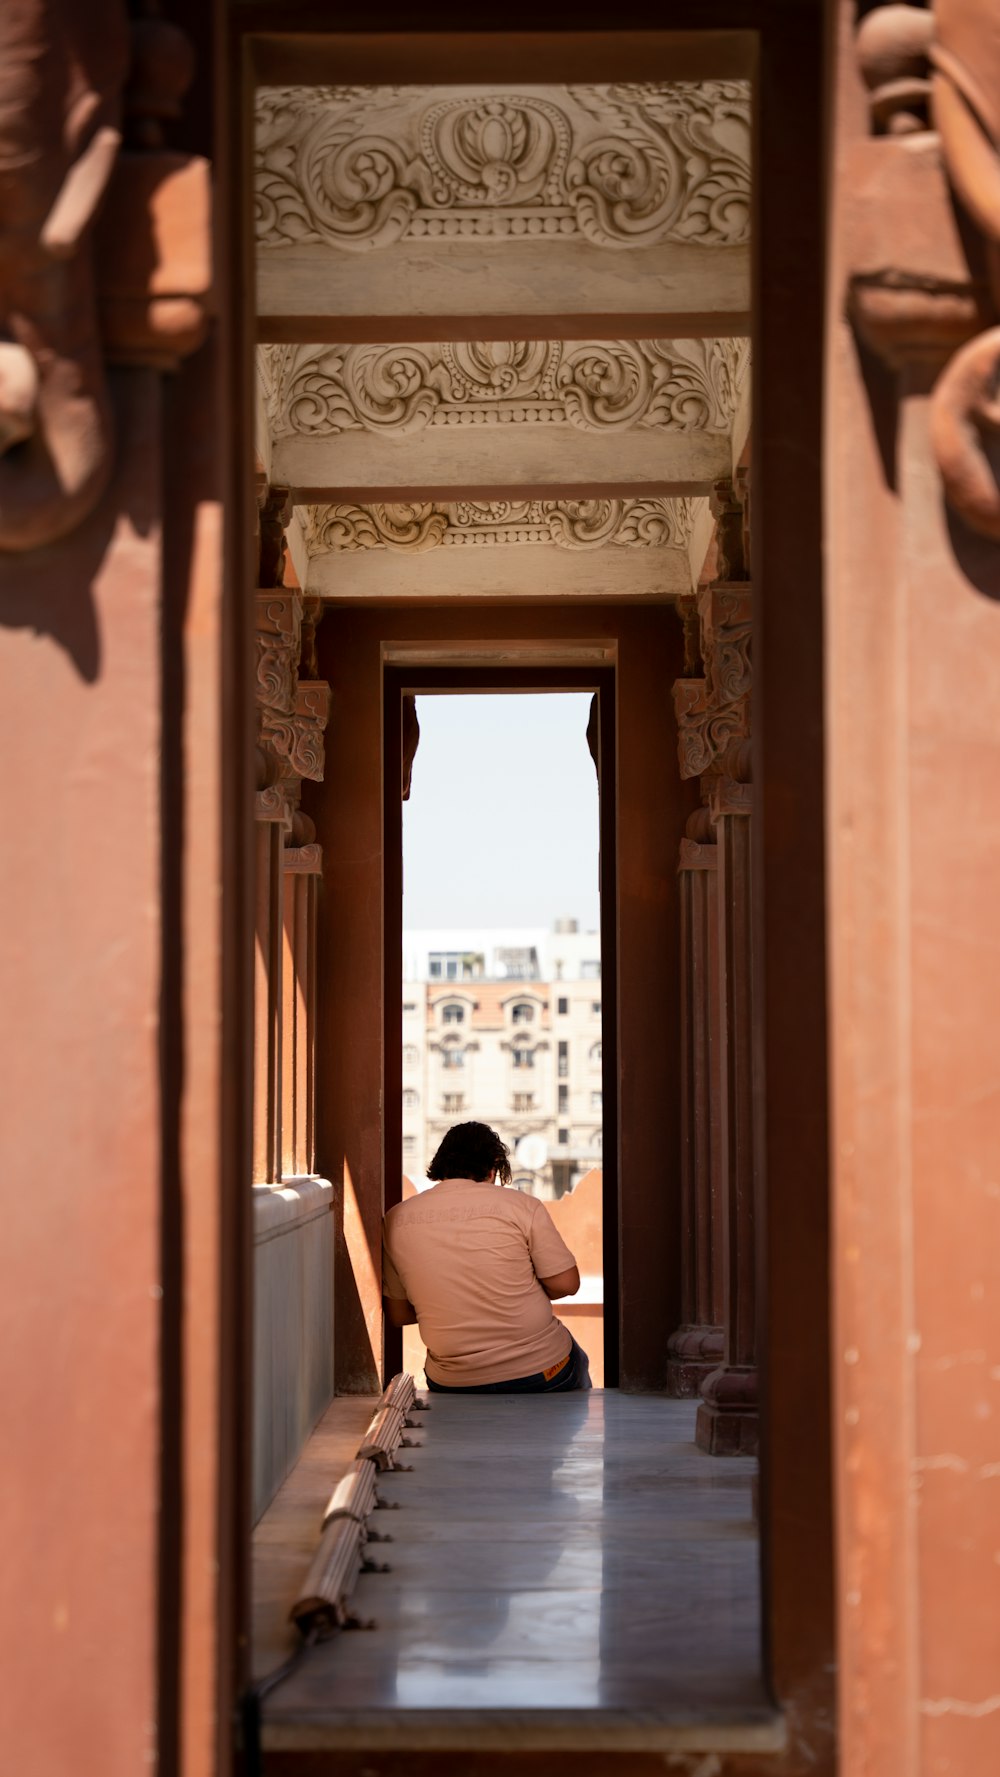 a person sitting in a doorway